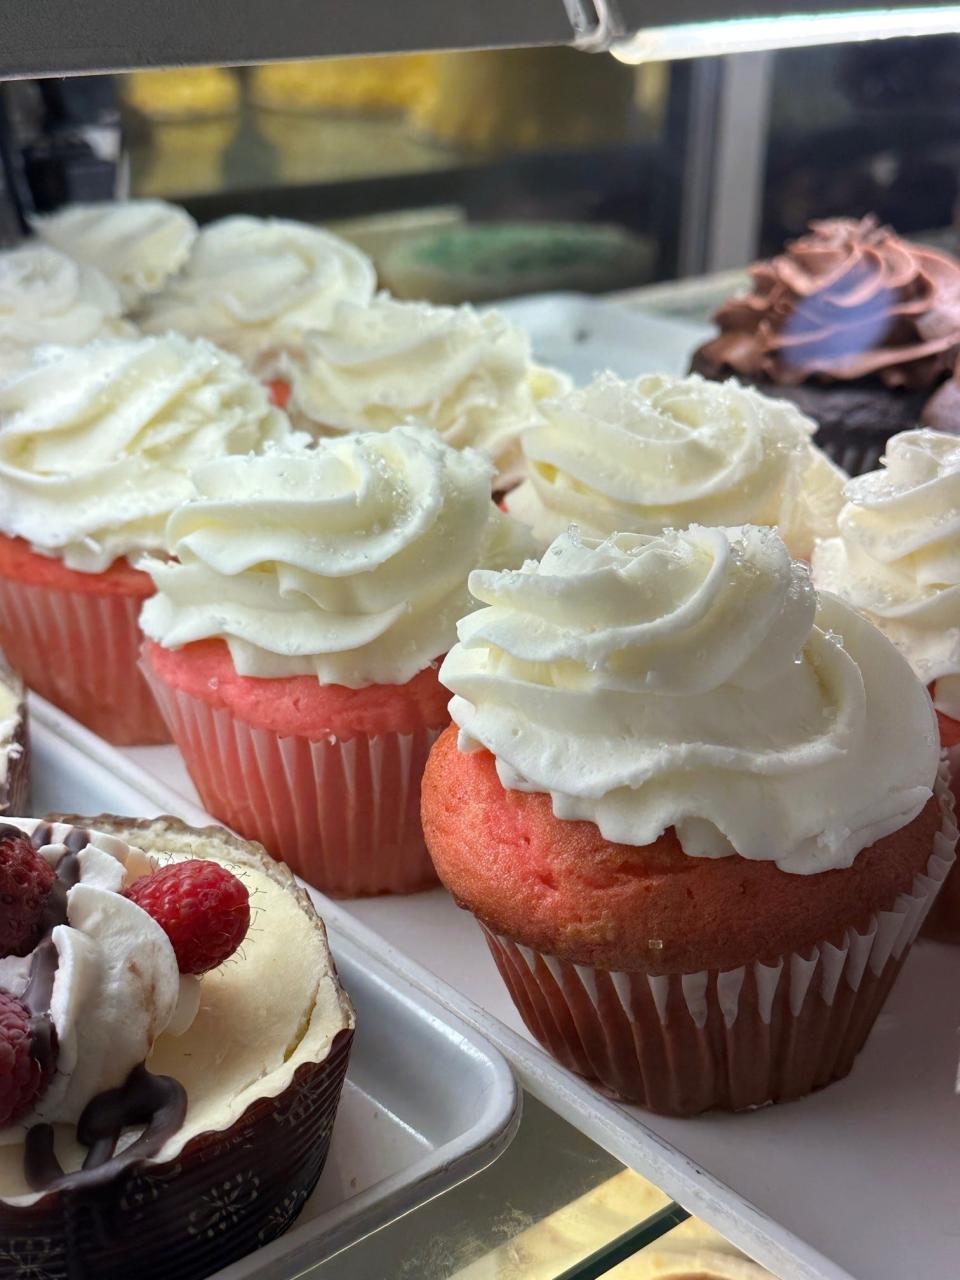 Jumbo cupcakes are just one of the goodies available at Blackbird Bakery in Bristol.